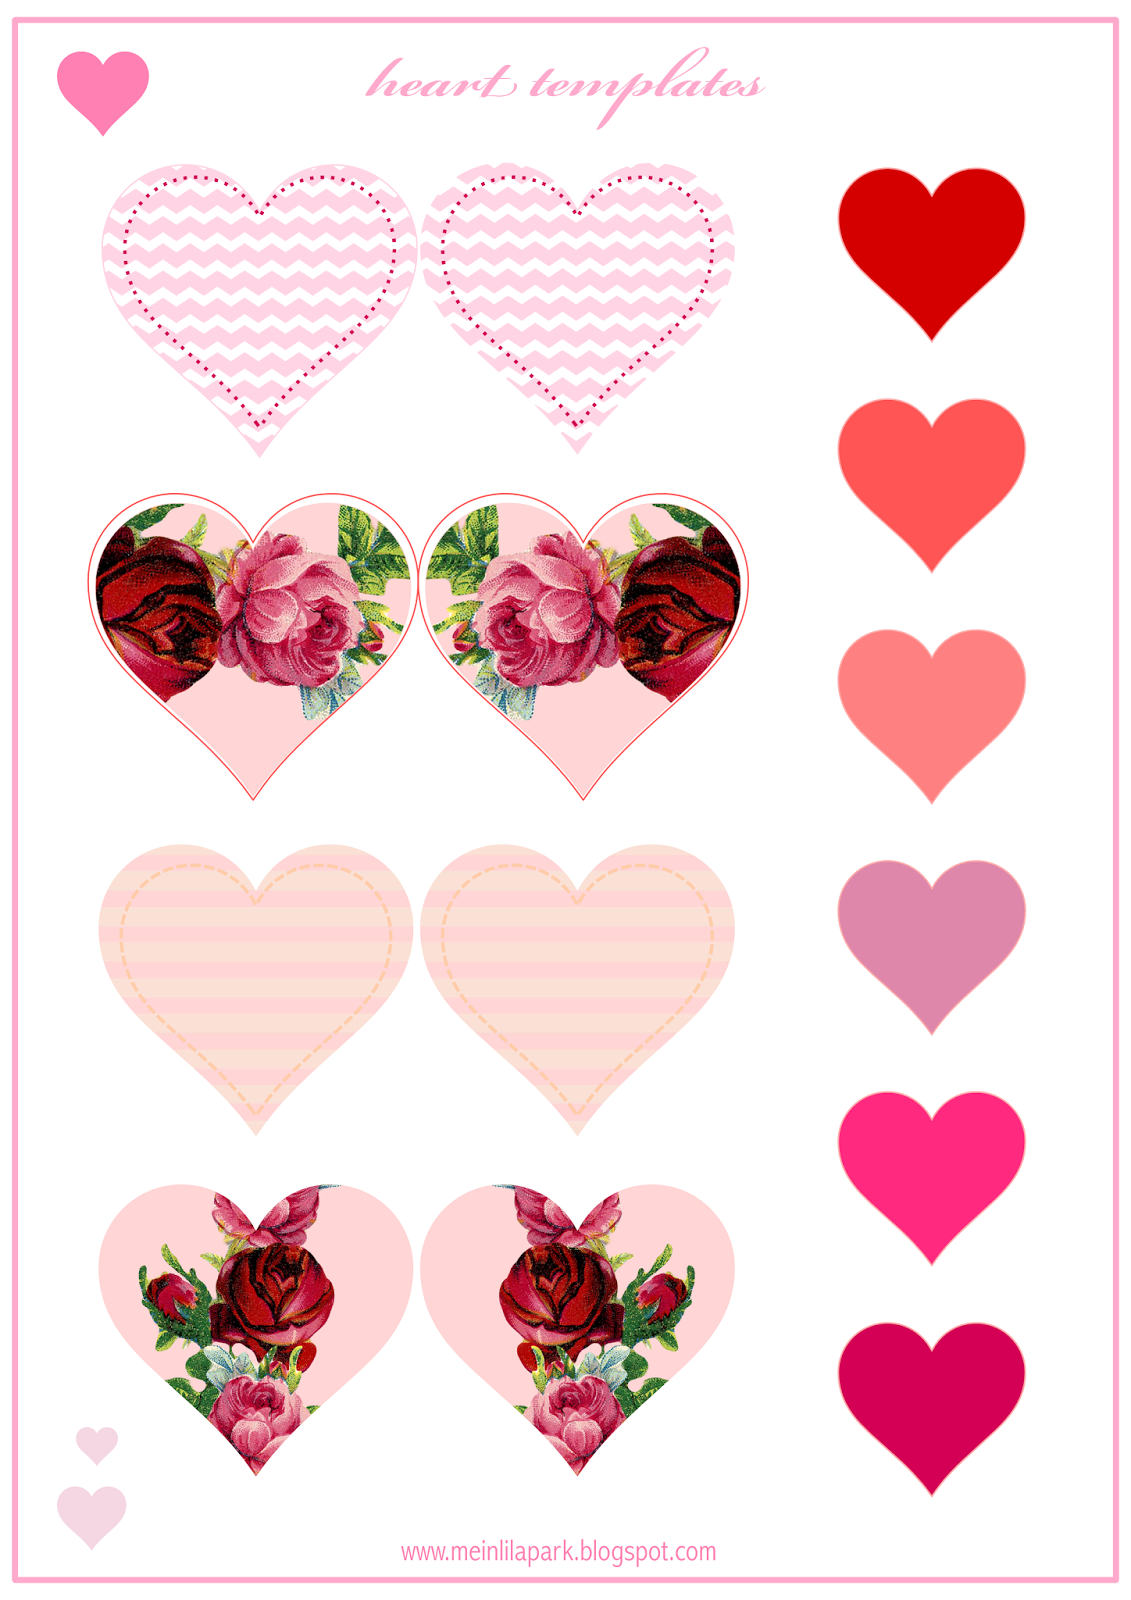 free-printable-template-for-valentines-printable-templates